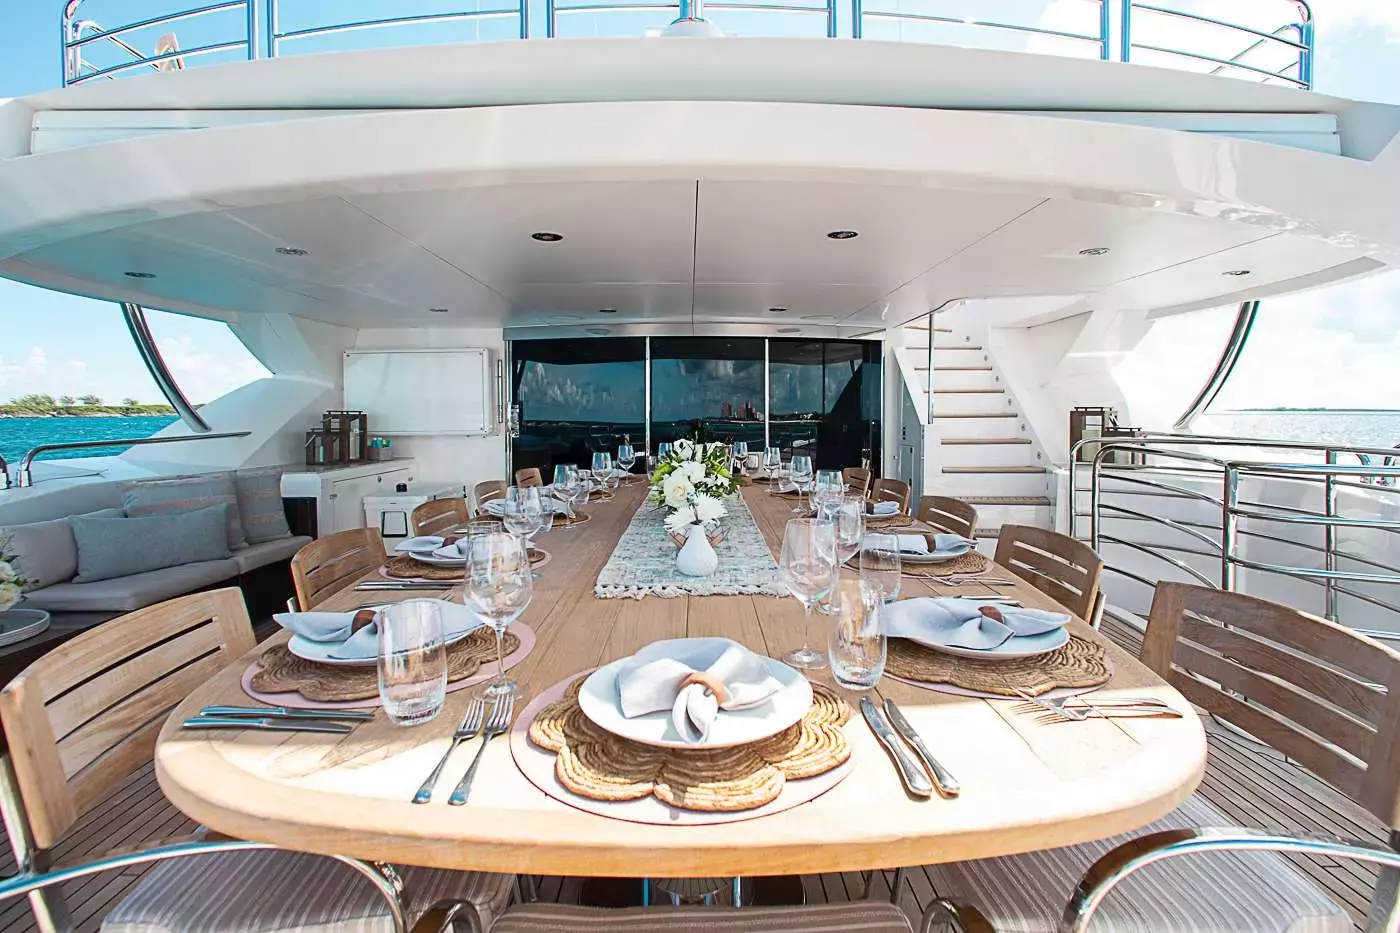 Acacia by Sunseeker - Top rates for a Charter of a private Superyacht in Antigua and Barbuda